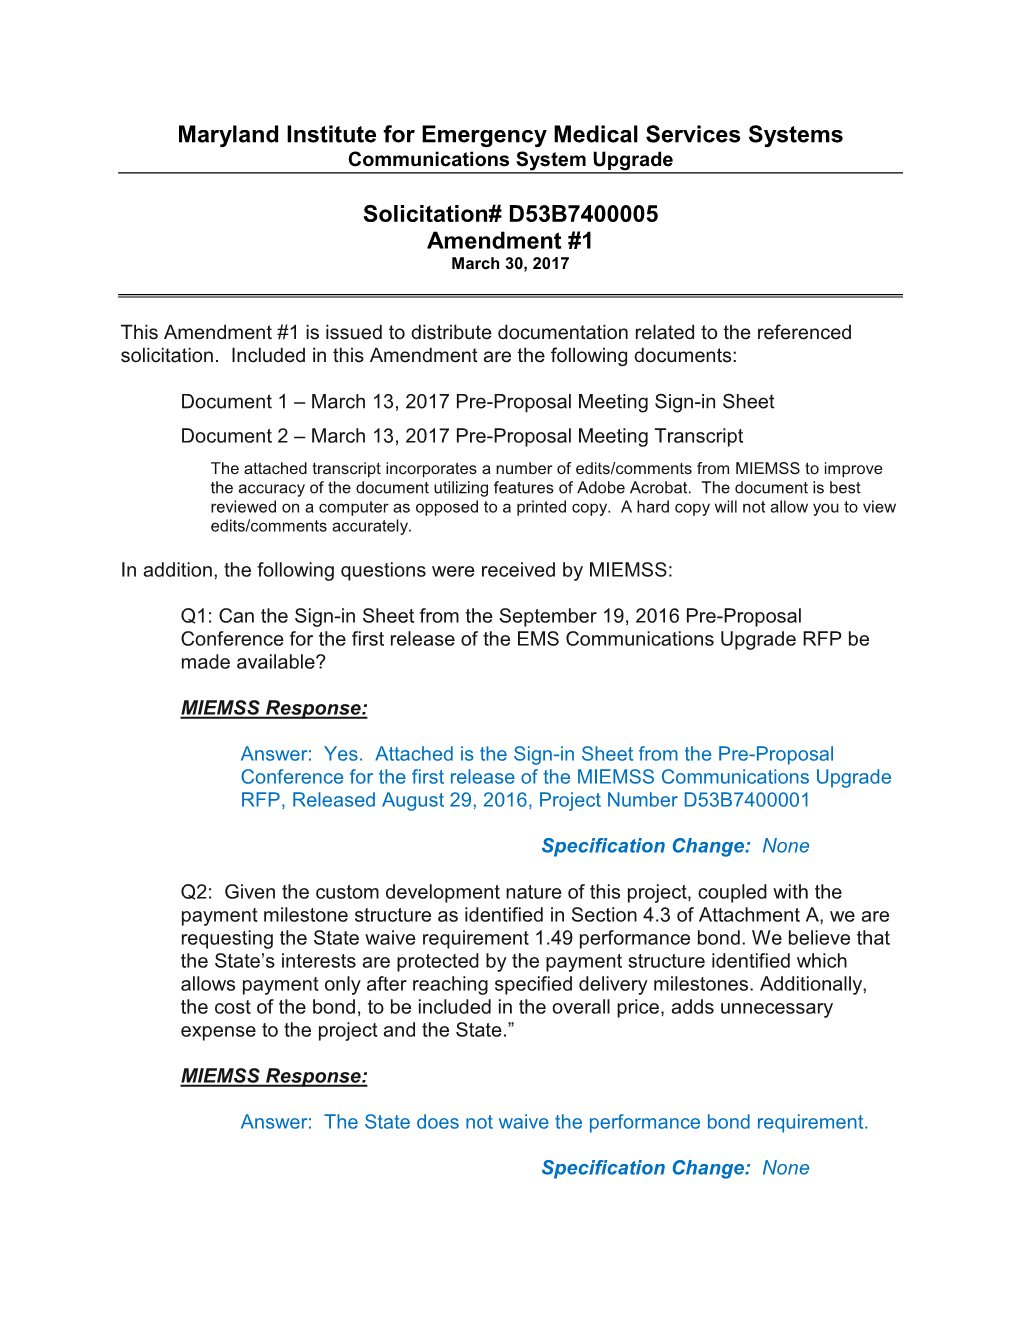 Maryland Institute for Emergency Medical Services Systems Solicitation# D53B7400005 Amendment #1